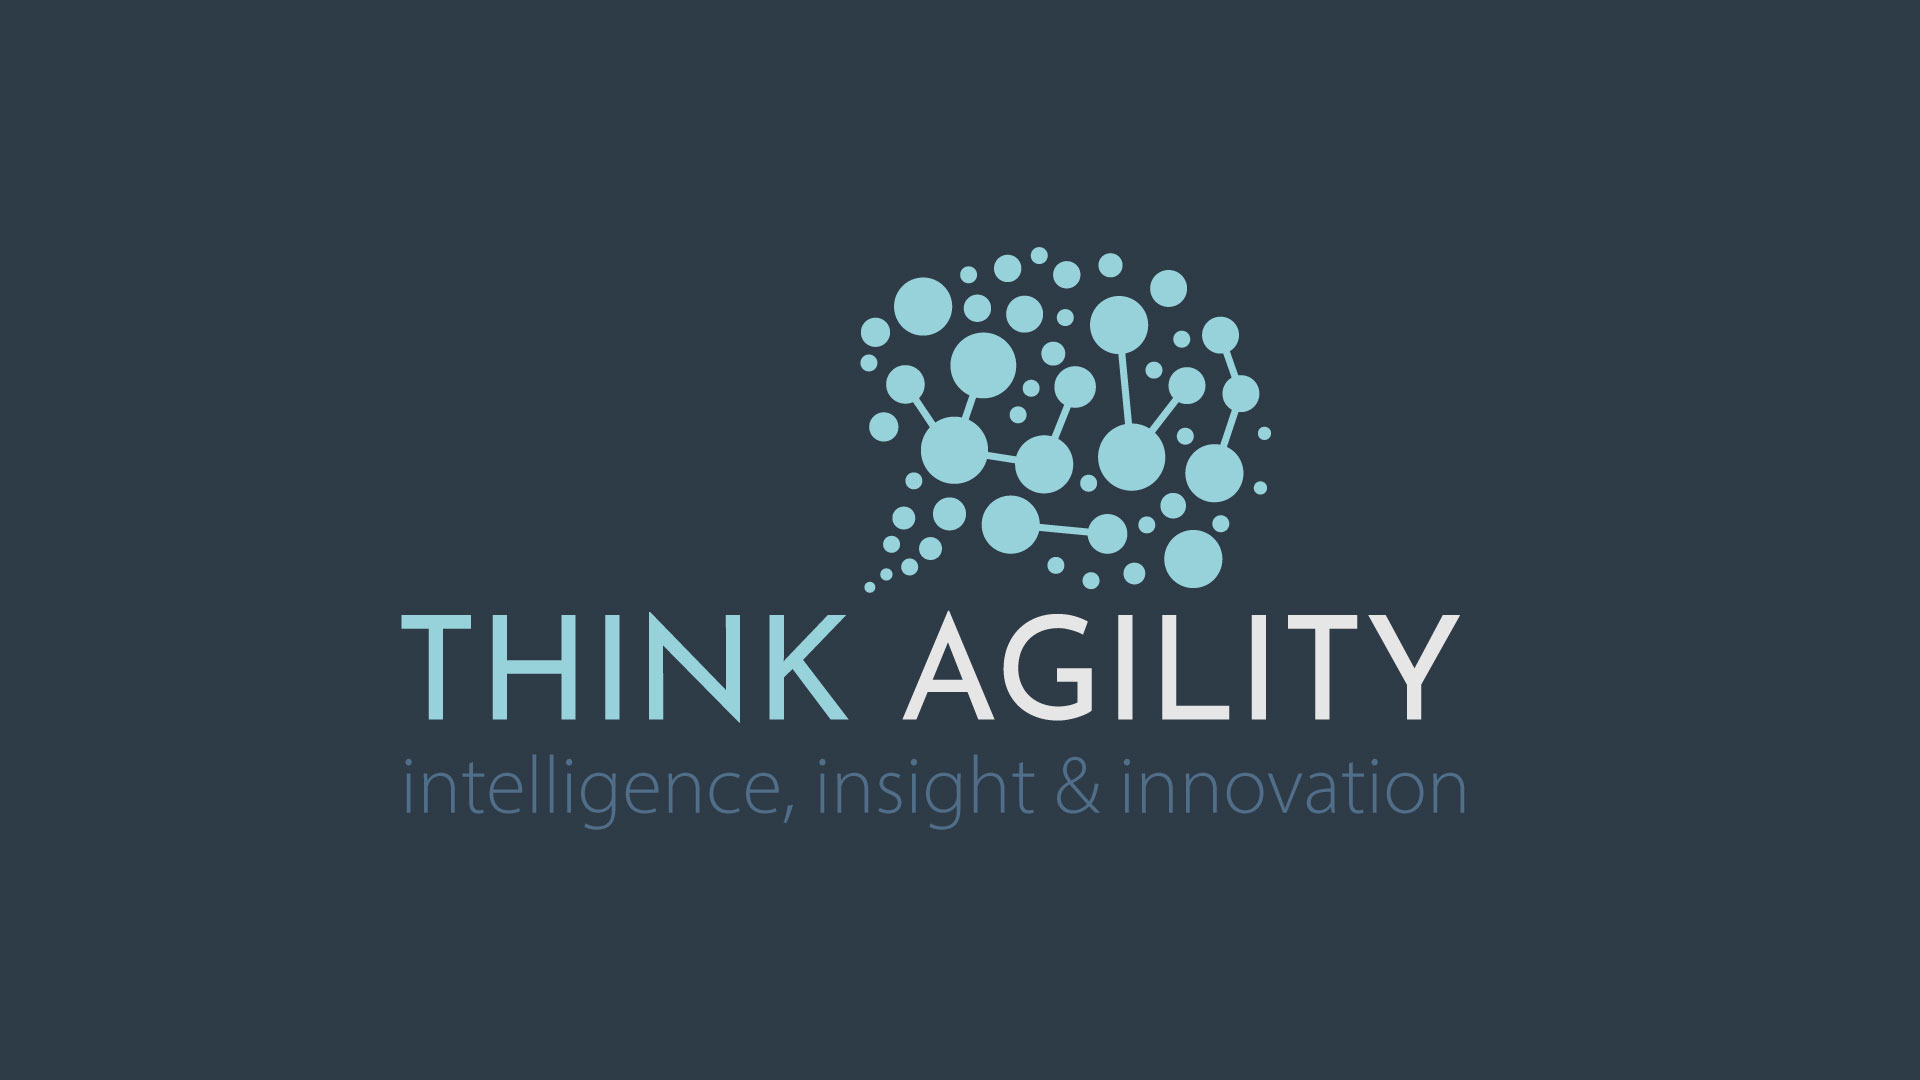 ThinkAgility is the brand new podcast series from Agilysis